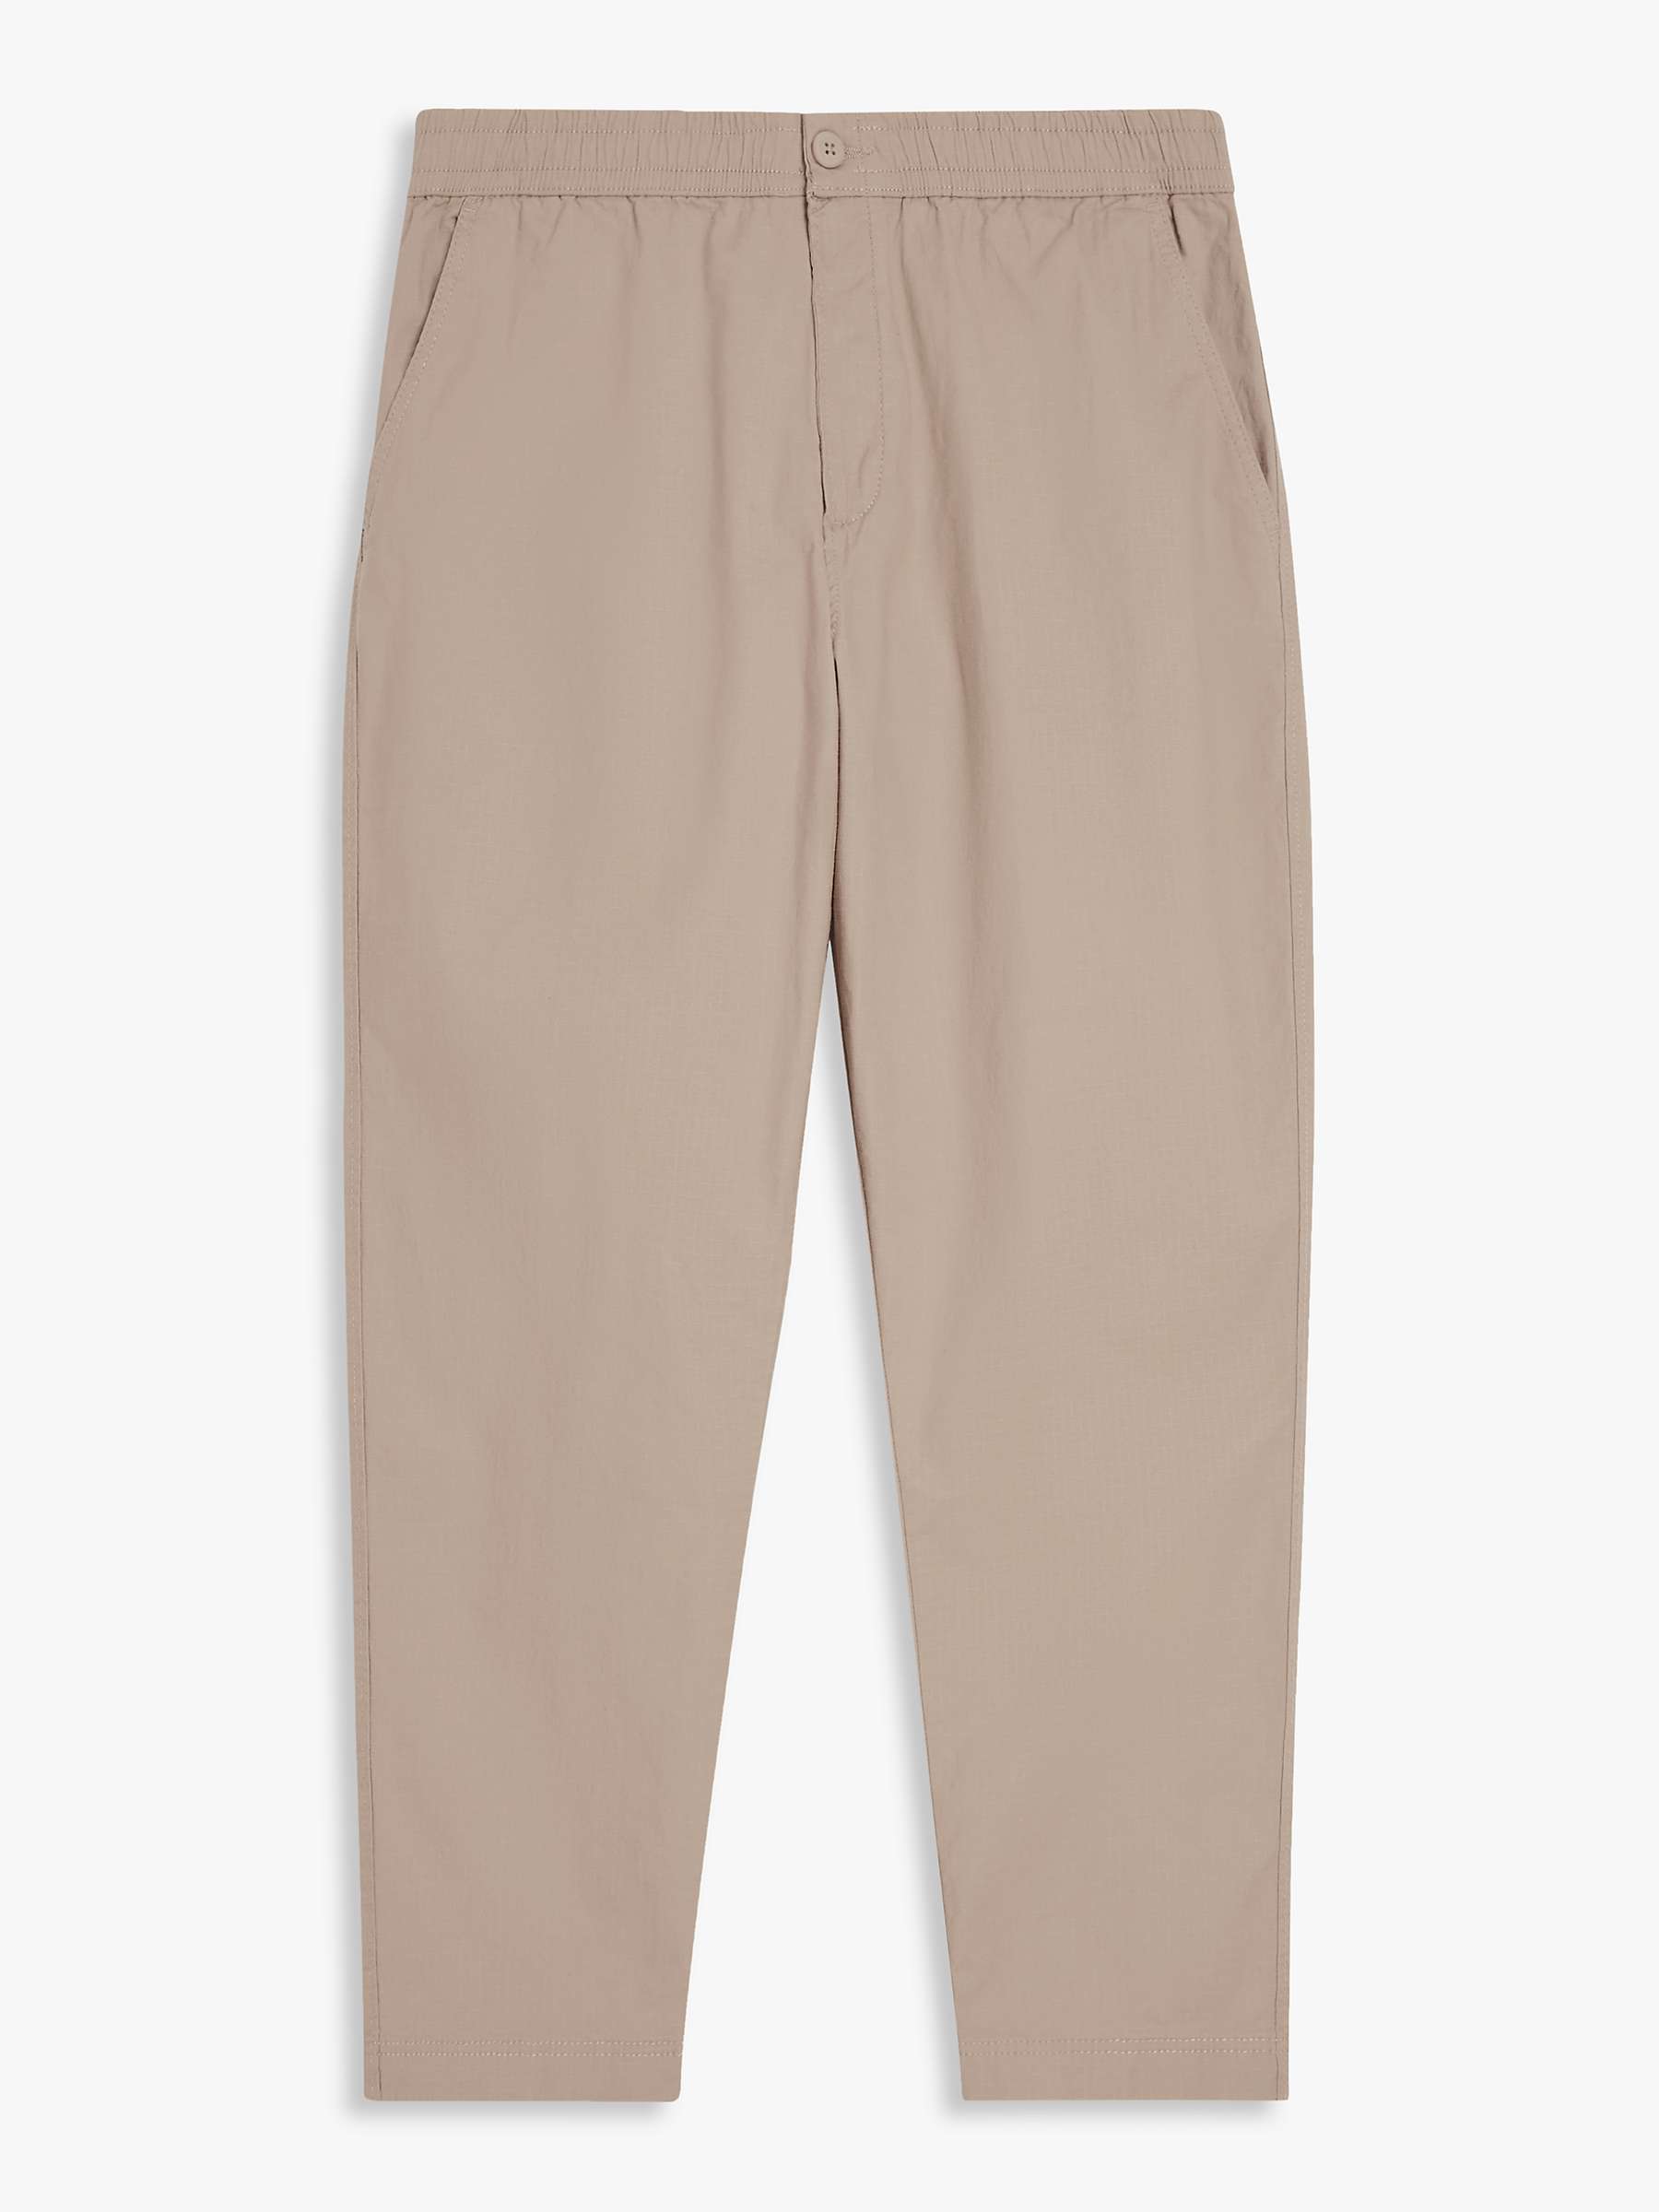 Buy John Lewis ANYDAY Relaxed Fit Ripstop Stretch Cotton Ankle Trousers Online at johnlewis.com